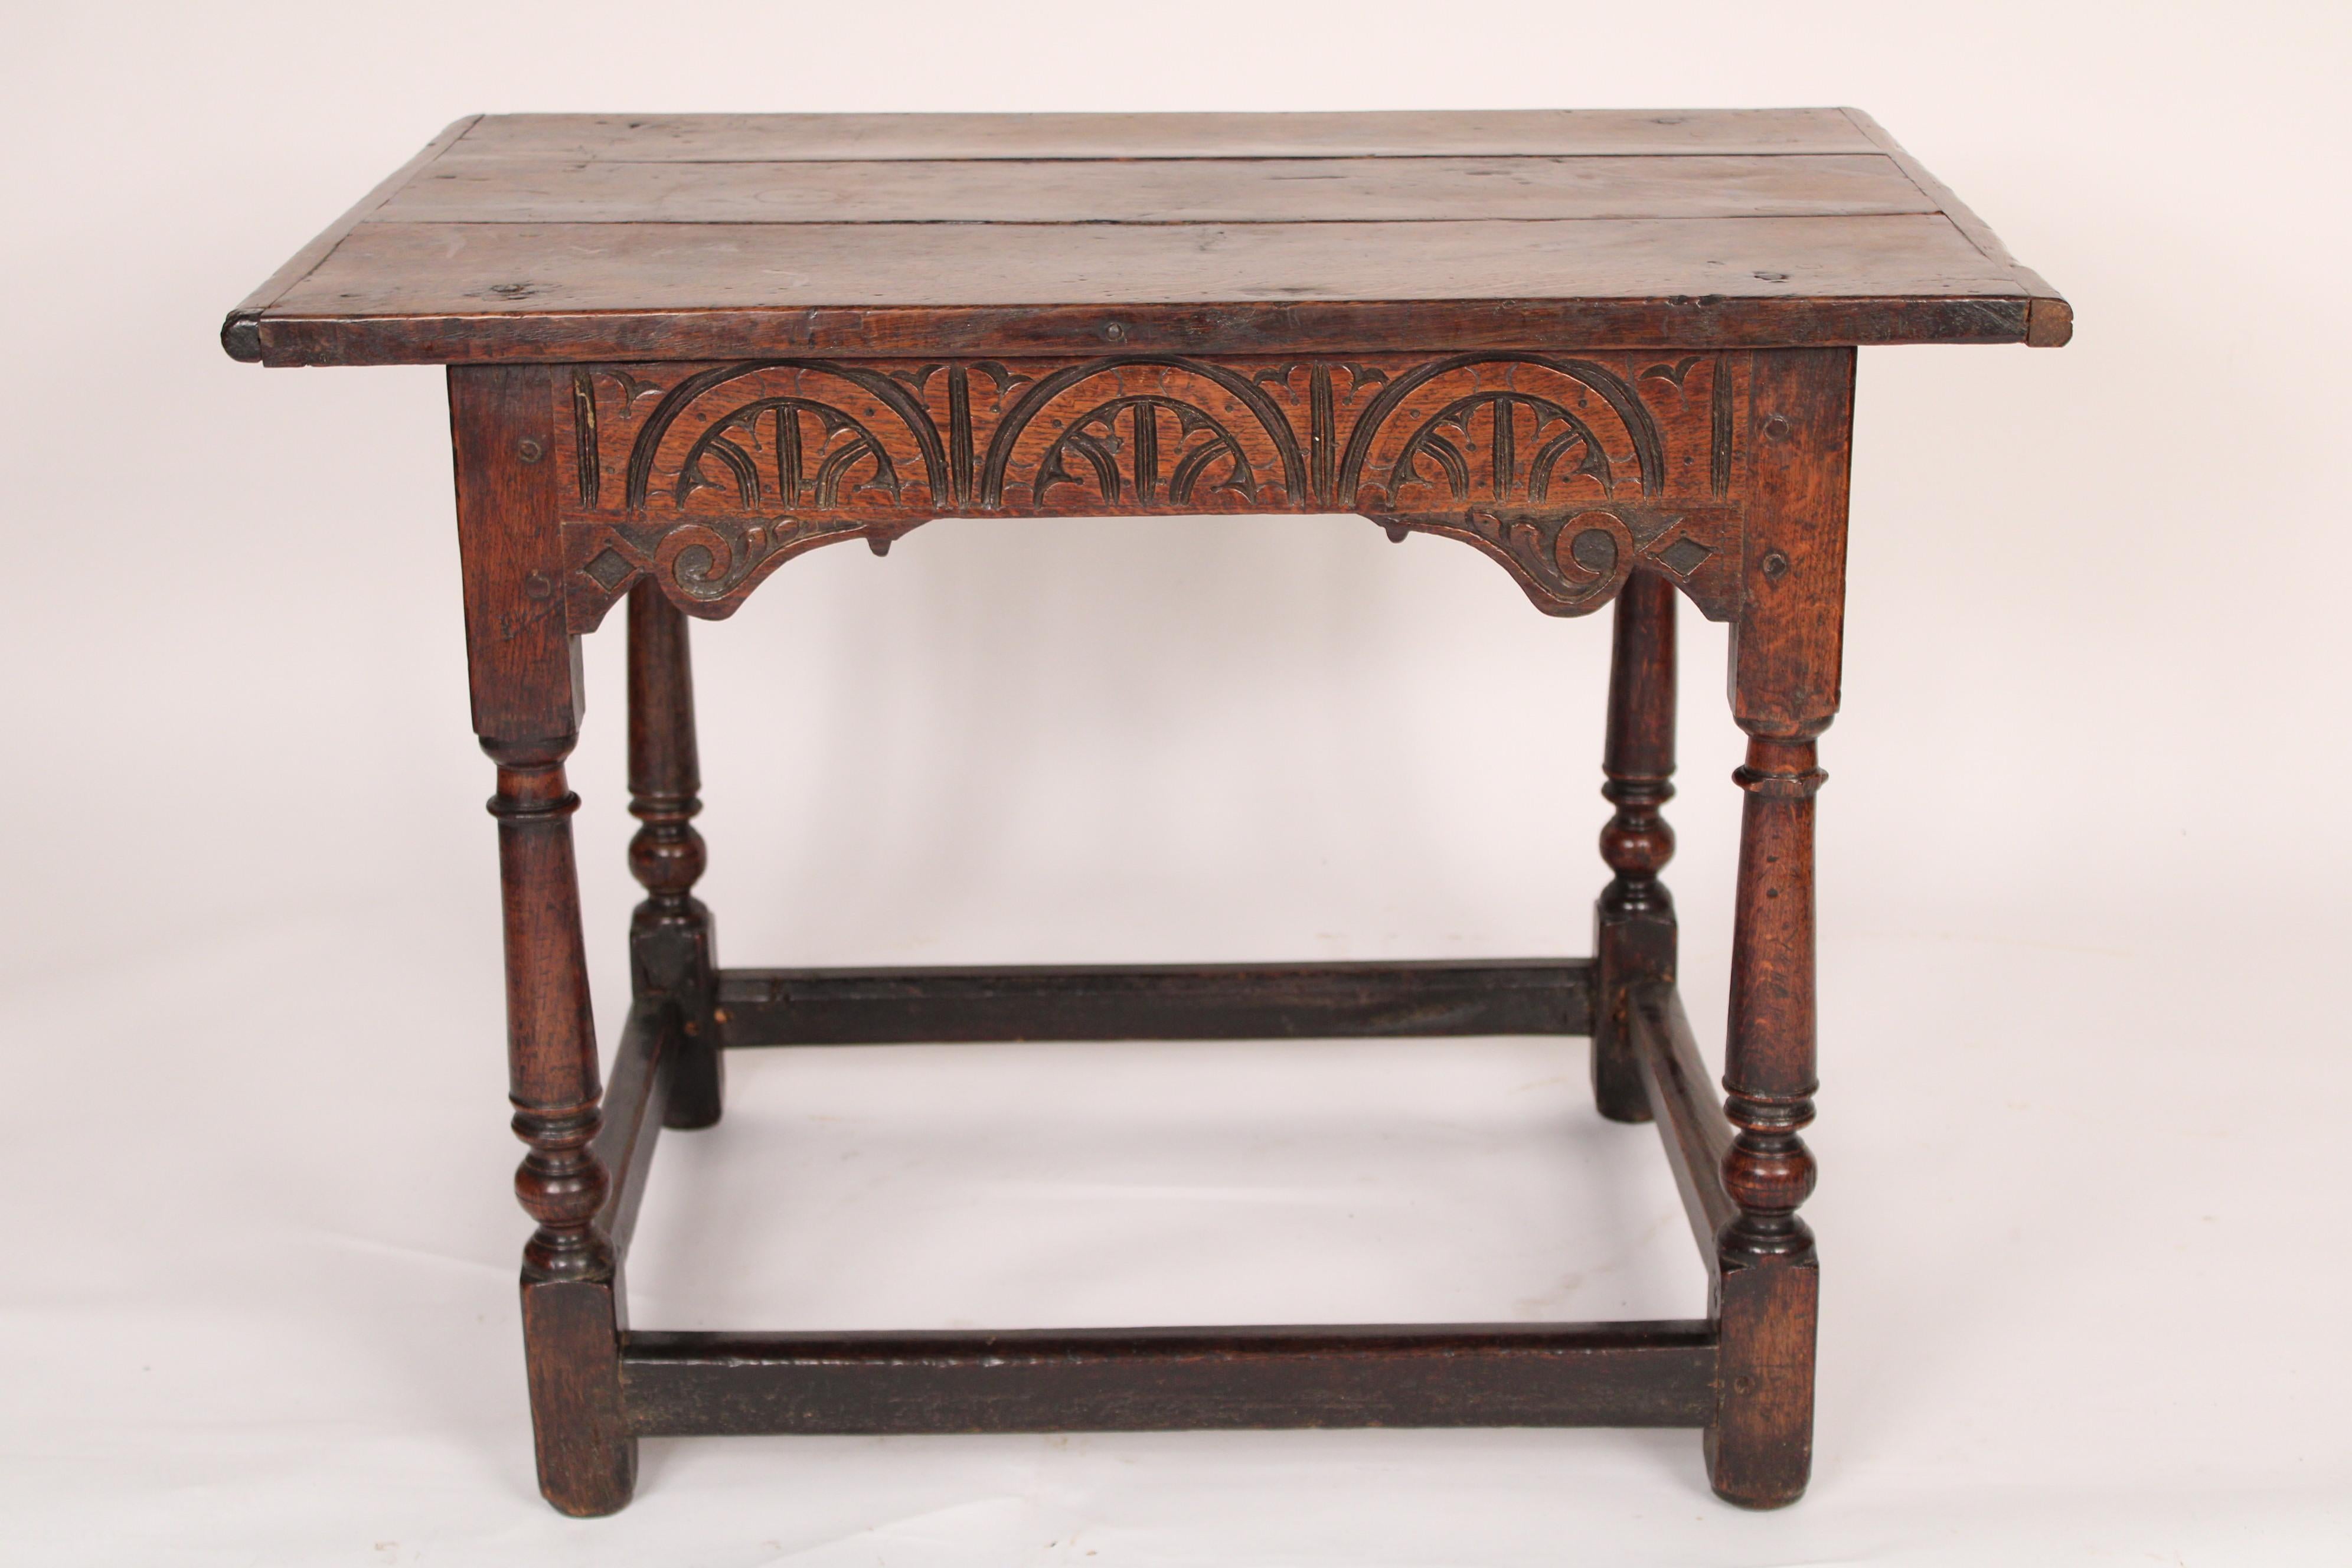 Antique Tudor style oak occasional table, 19th century. With a rectangular over hanging 3 board top, arched and carved decorations on the front and back frieze, turned legs joined by box stretchers. The oak has a nice old patina. Mortise tenon and